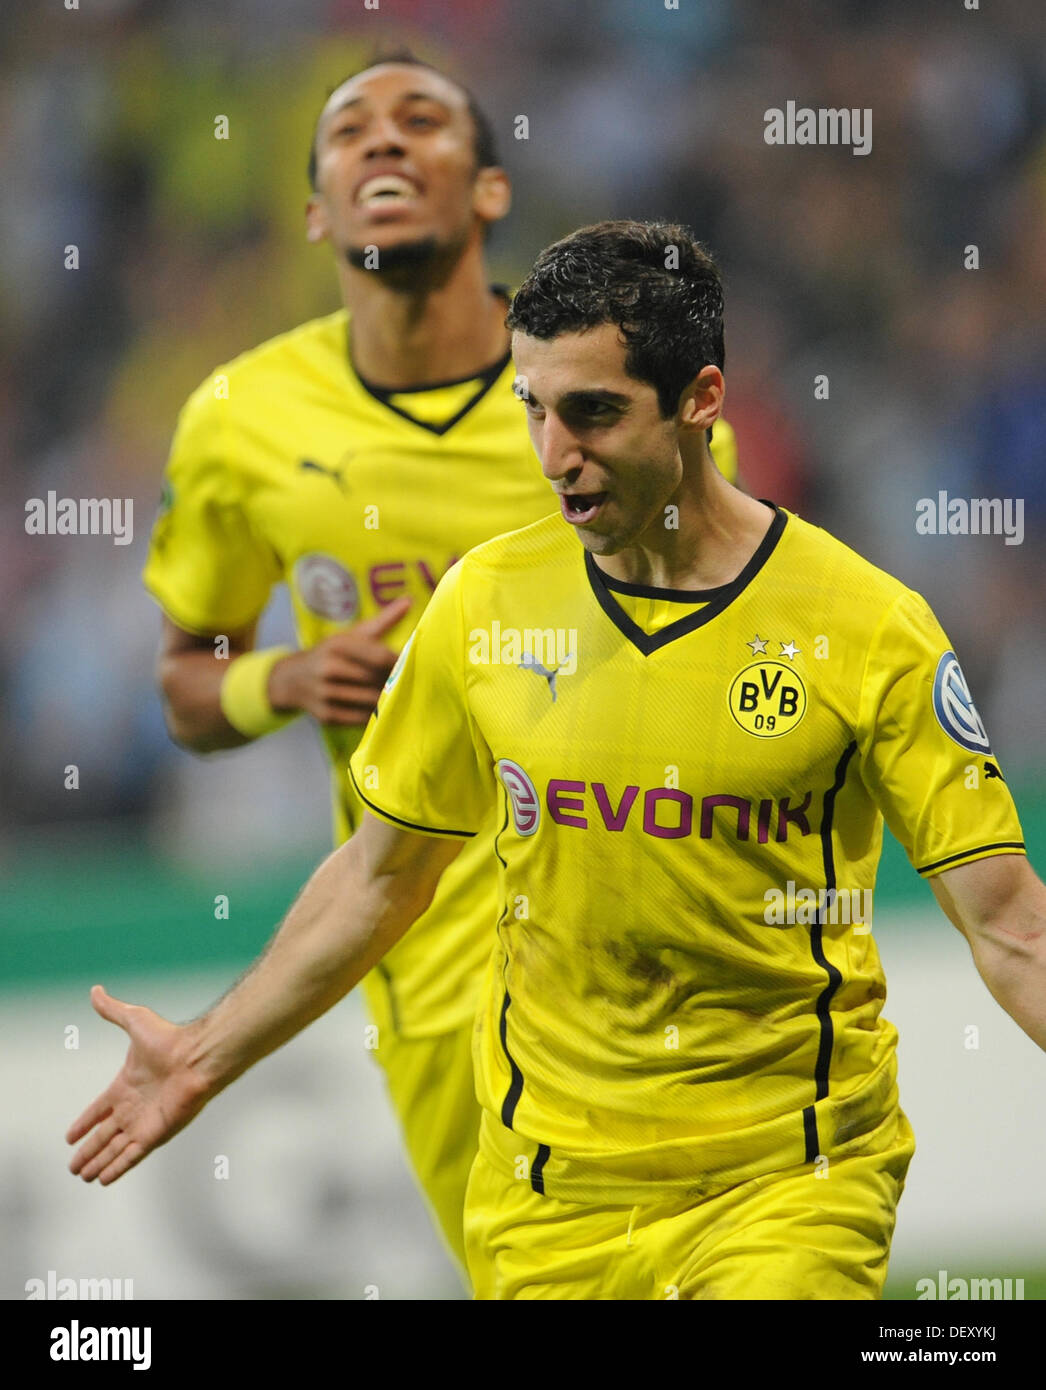 Munich, Germany. 24th Sep, 2013. Dortmund's Pierre-Emerick Aubameyang (L) and Henrich Mchitarjan celebrate the 2-0 goal during the DFB Cup second round match between TSV 1860 Munich and Borussia Dortmund at Allianz Arena in Munich, Germany, 24 September 2013. Photo: ANDREAS GEBERT/dpa/Alamy Live News Stock Photo